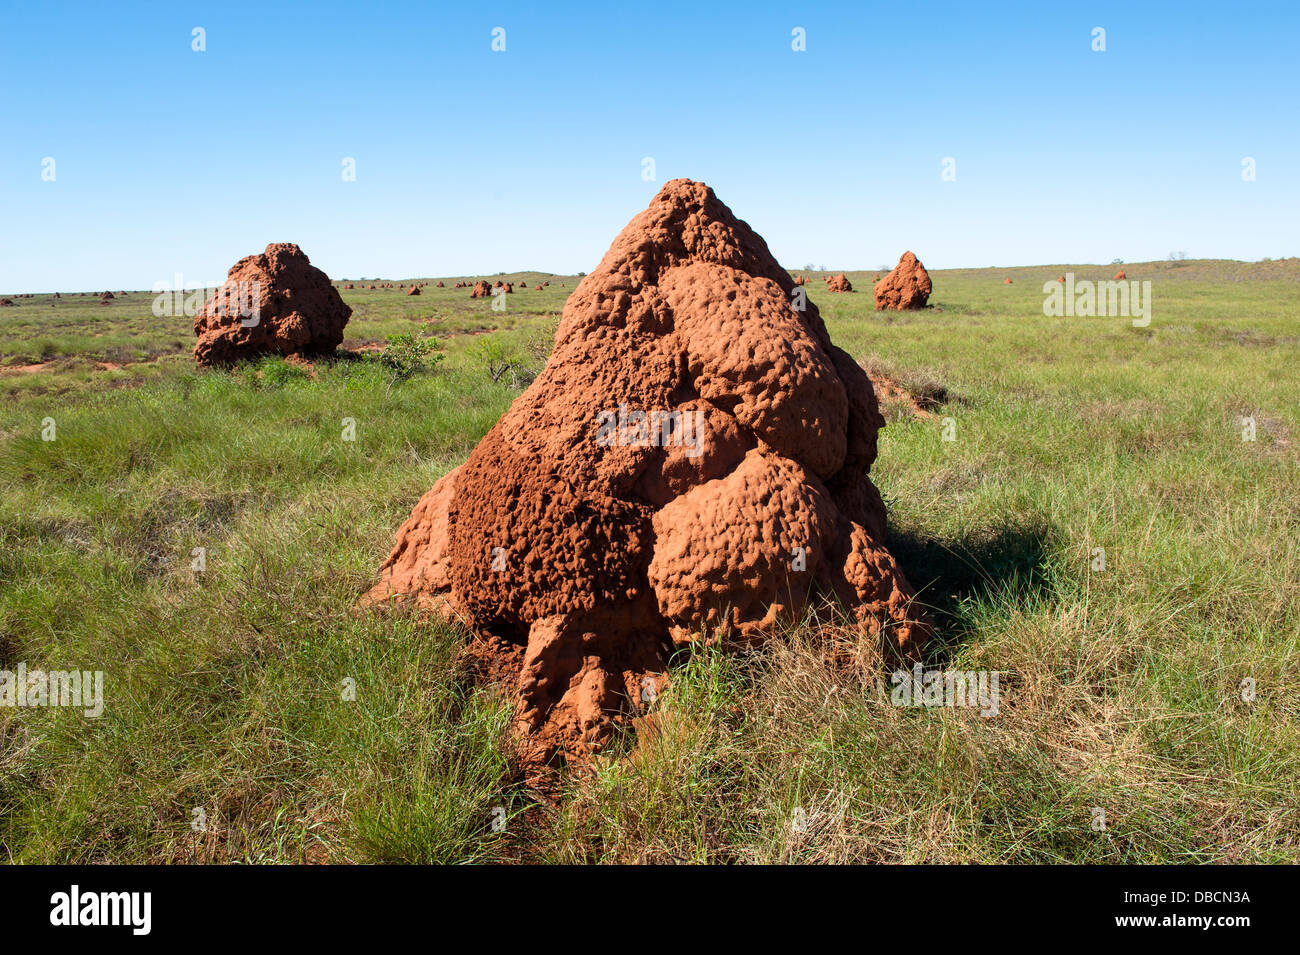 Termite mounds at the 'City of Termites' in the coastal headlands of Onslow, Western Australia Stock Photo